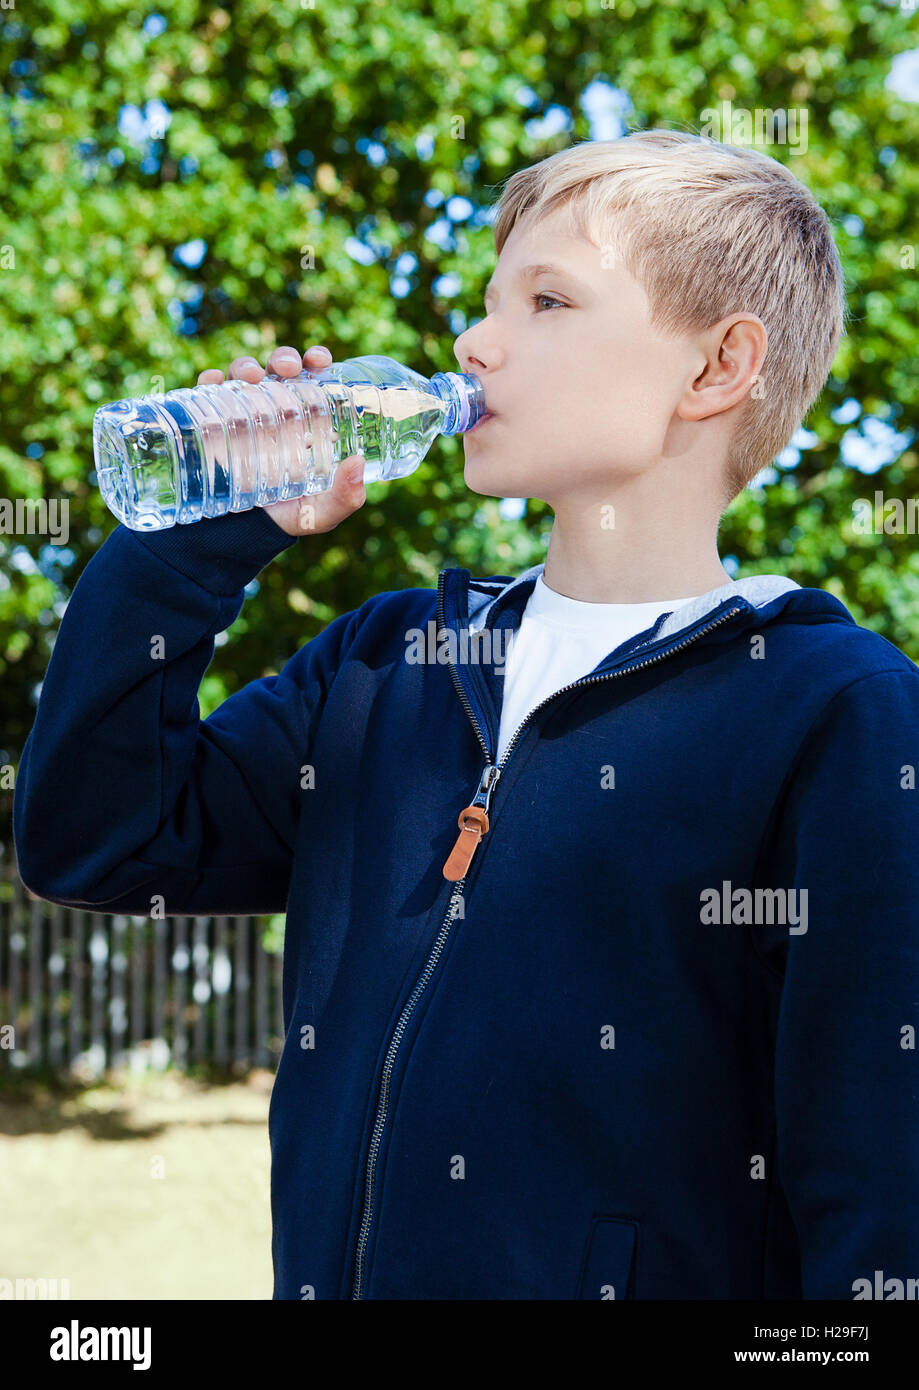 https://c8.alamy.com/comp/H29F7J/young-teenage-boy-drinking-healthy-still-water-in-park-summer-time-H29F7J.jpg